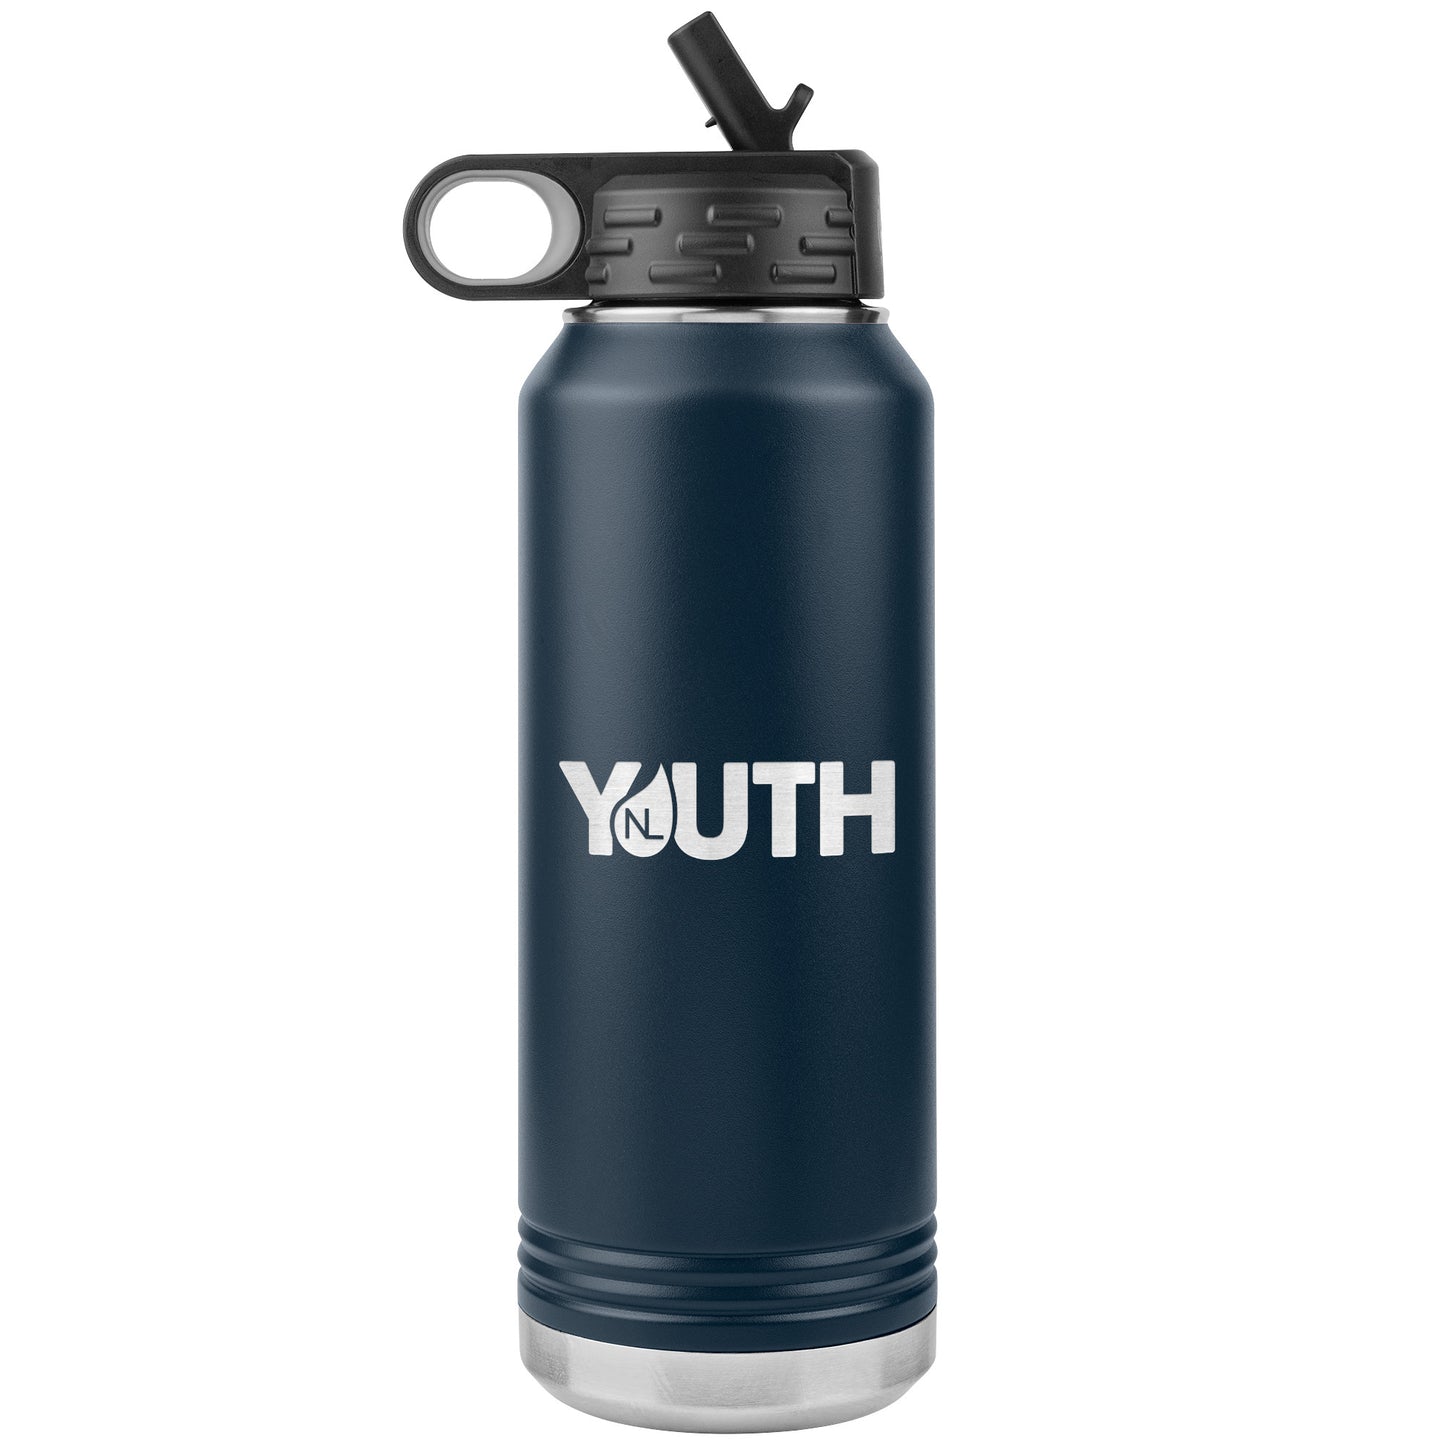 New Life YOUTH - Insulated Tumblers